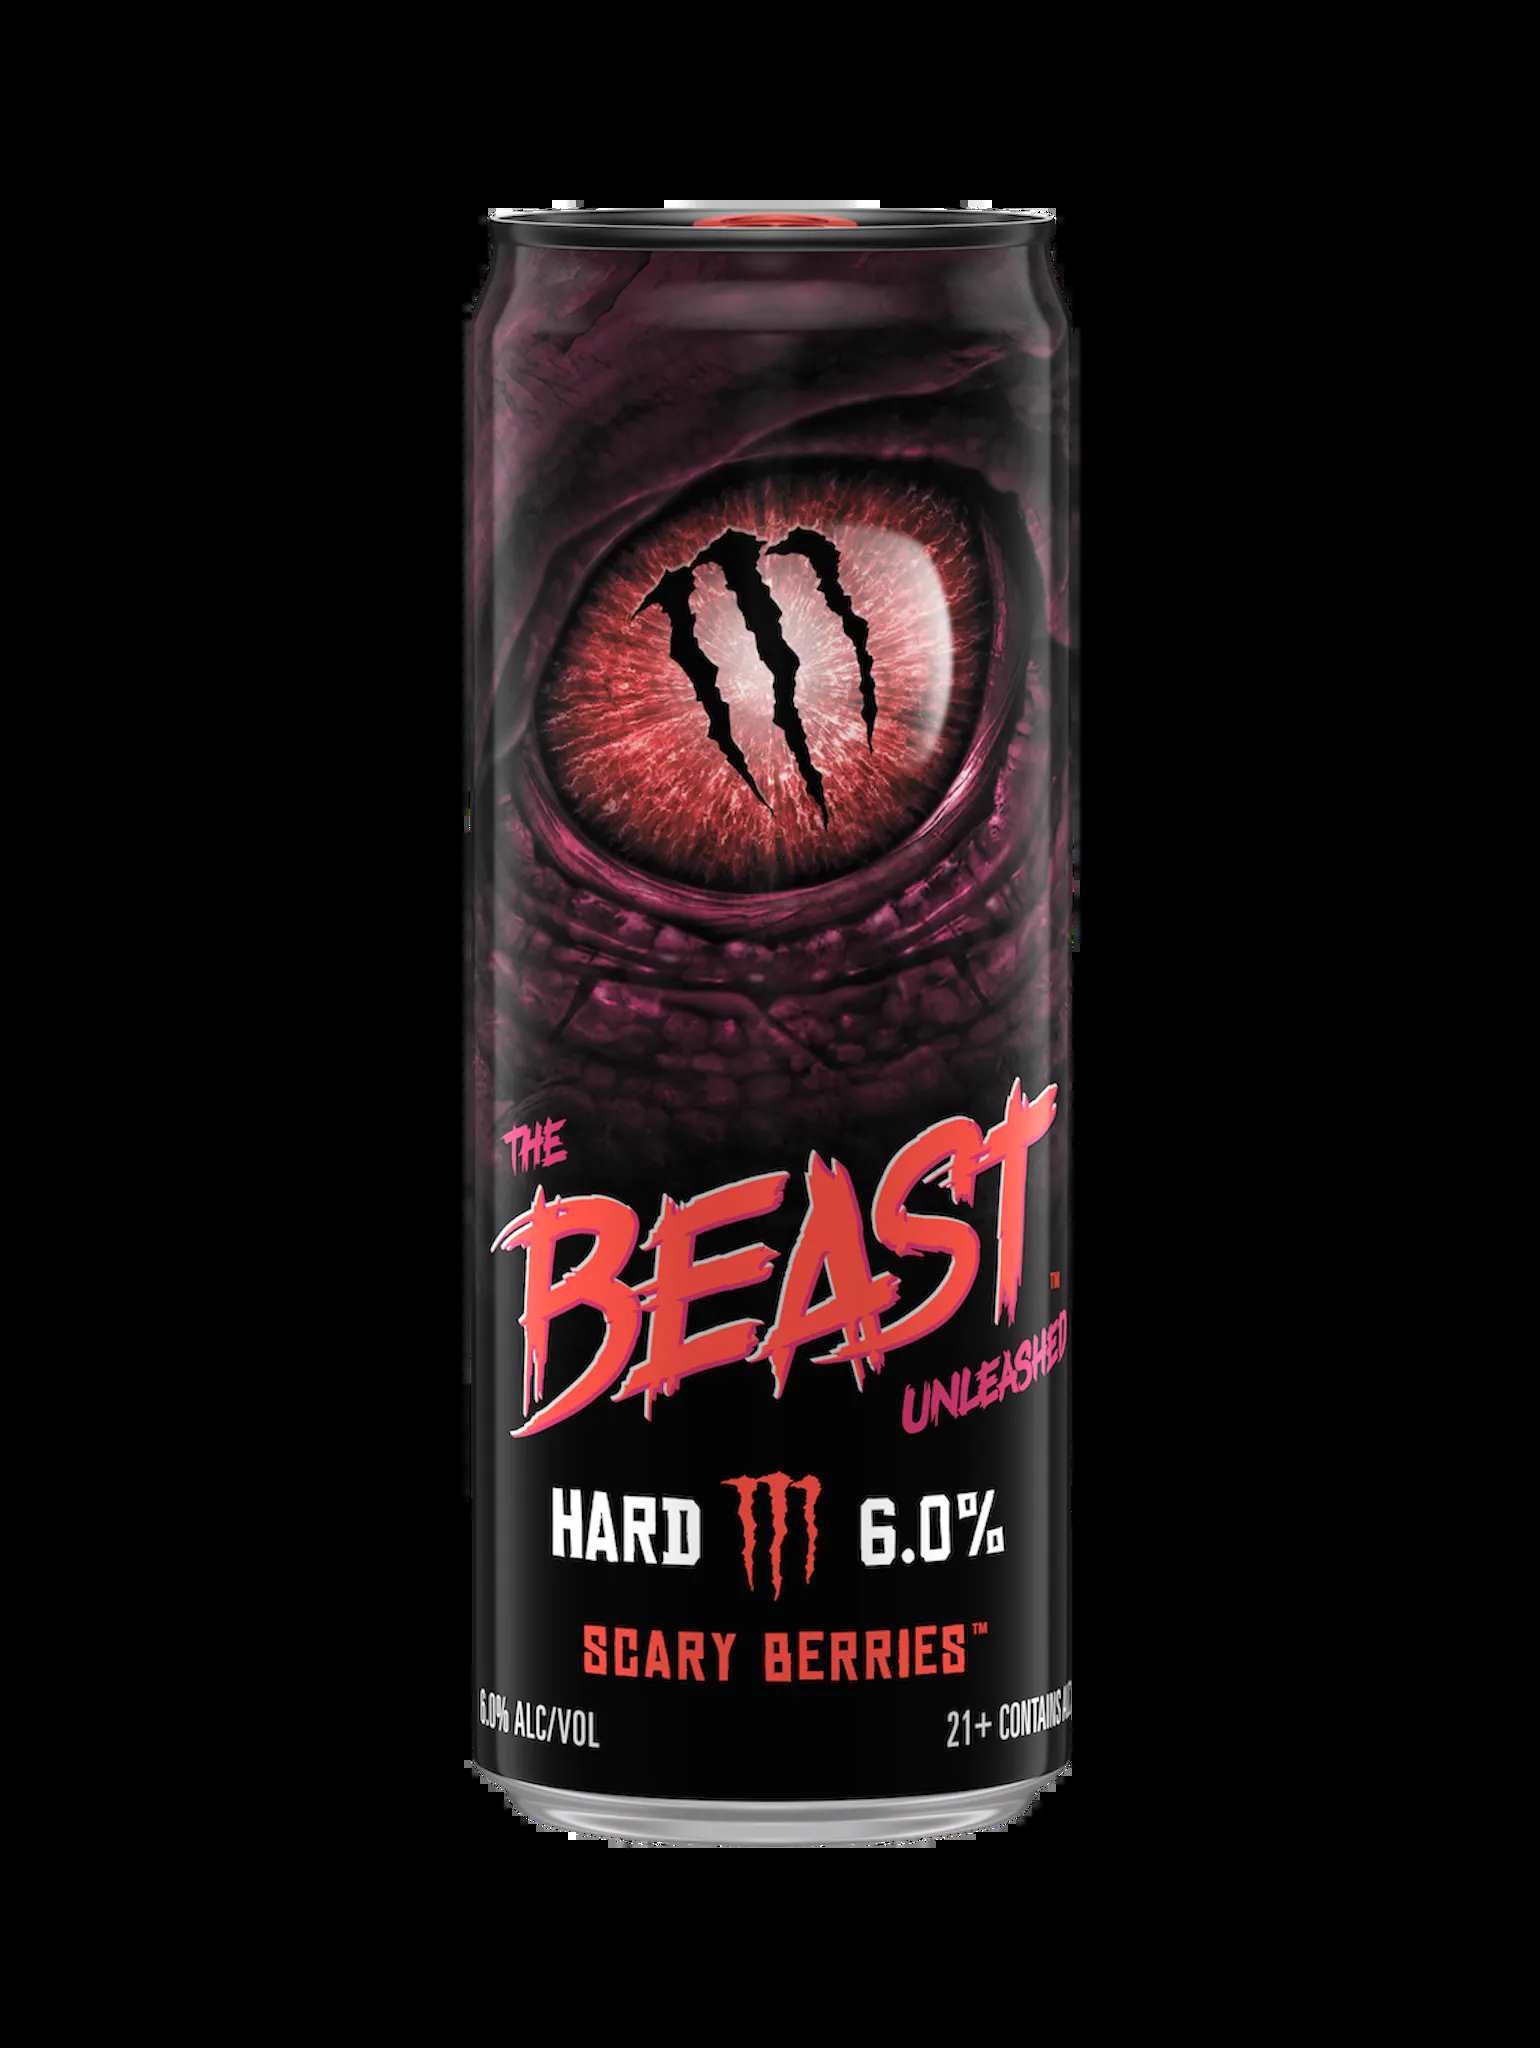 Monster The Beast Unleashed Scary Berries 355ml FULL (lattine con ammaccature ) beast beast unleashed beast24 hard tea monster monster energy nasty nasty beast not-on-sale unleashed usa